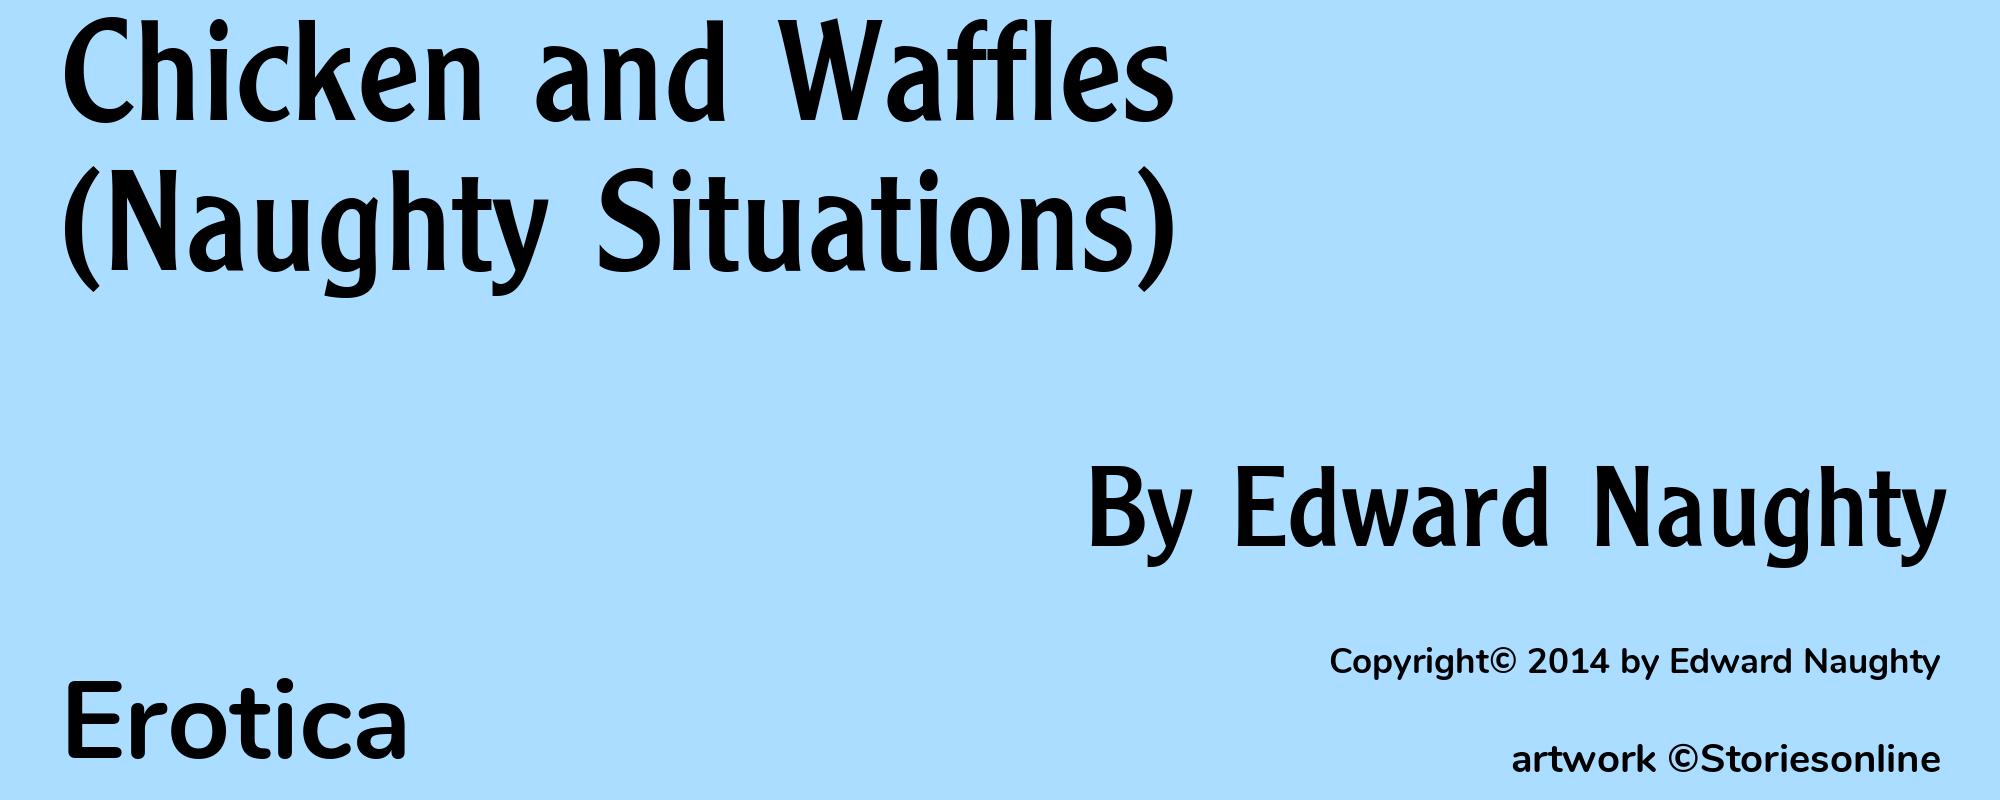 Chicken and Waffles (Naughty Situations) - Cover